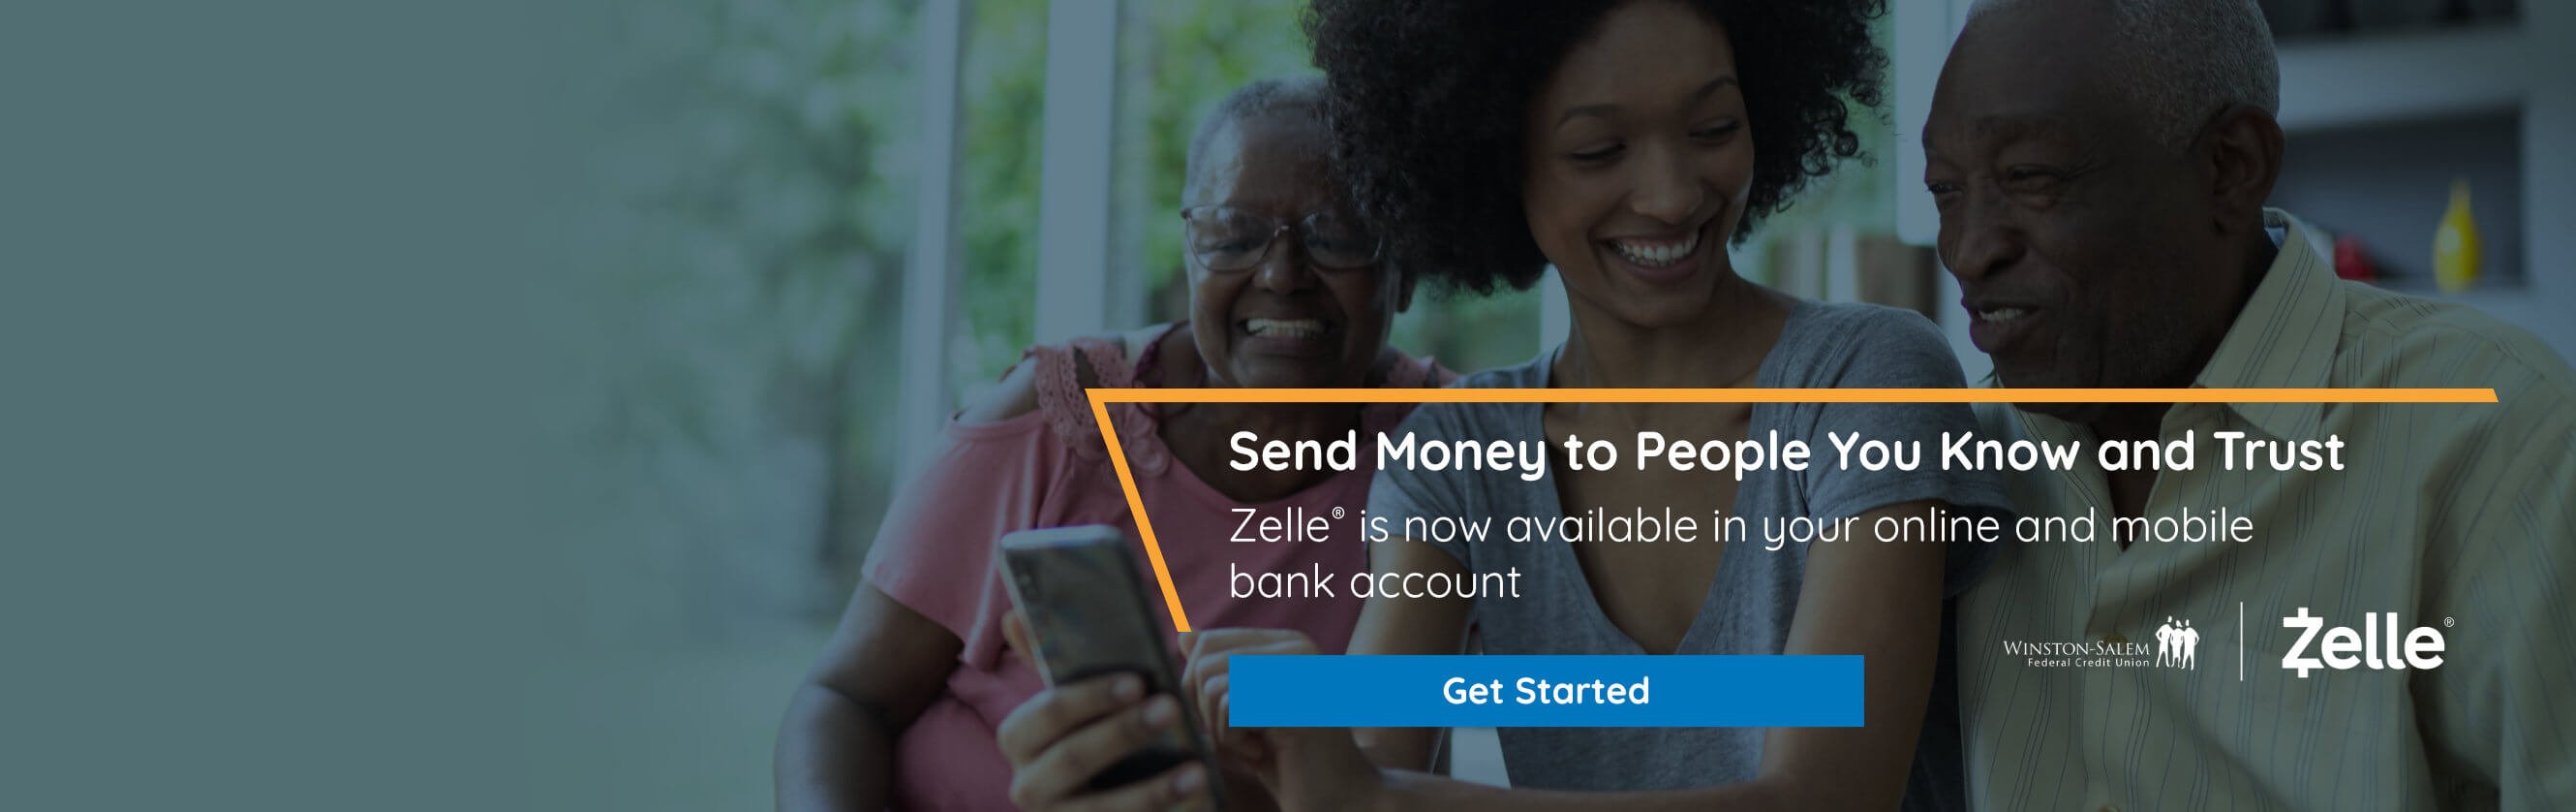 Zelle is now available in your online and mobile banking account. Get Started.